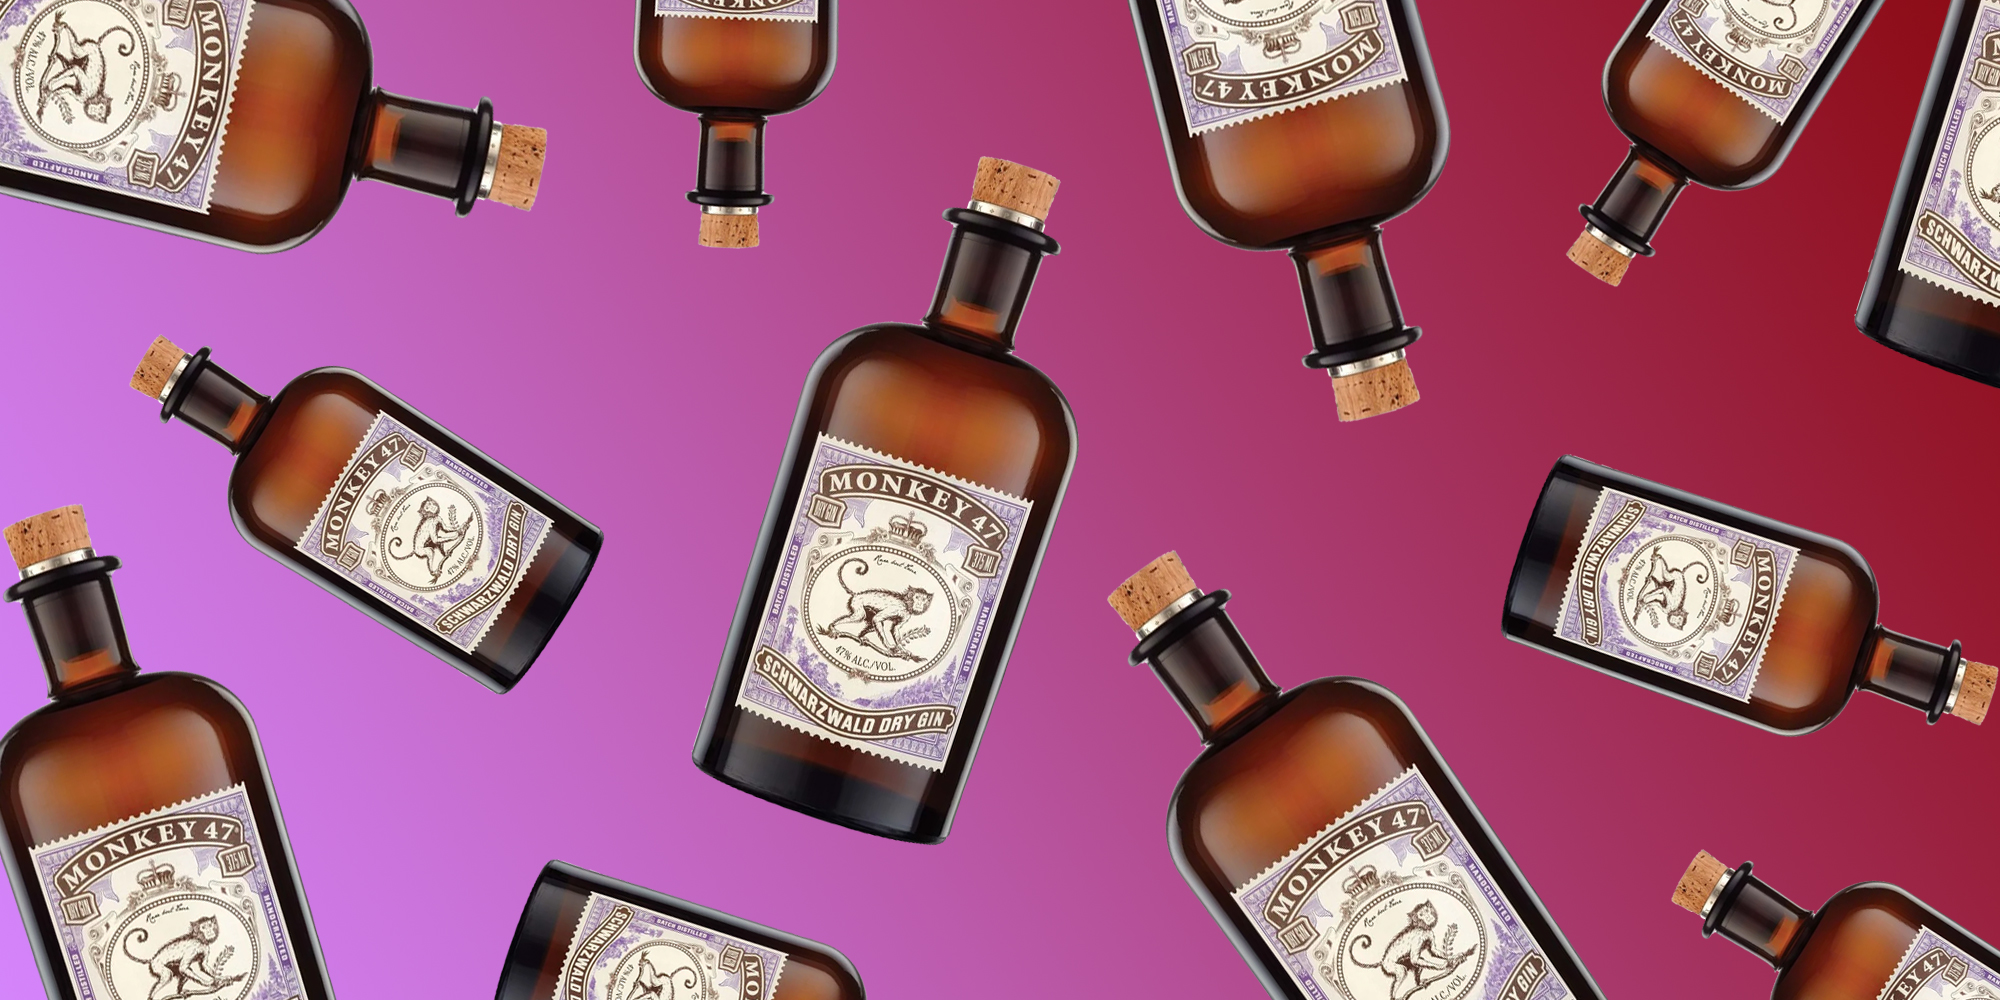 10 Things You Should Know About Monkey 47 Gin | VinePair | Gin